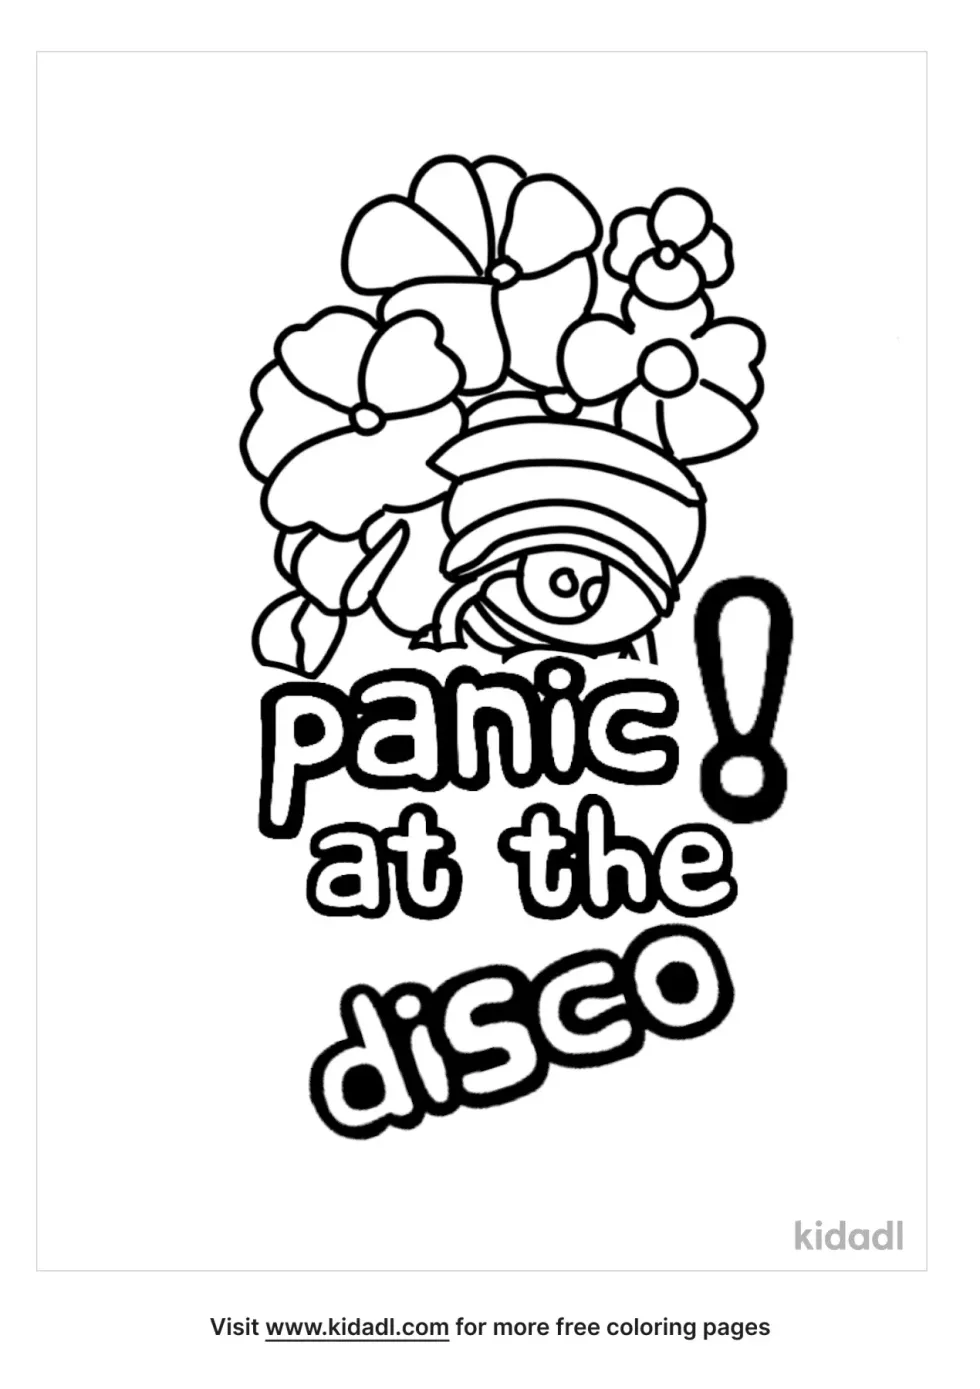 Panic! At The Disco Coloring Page